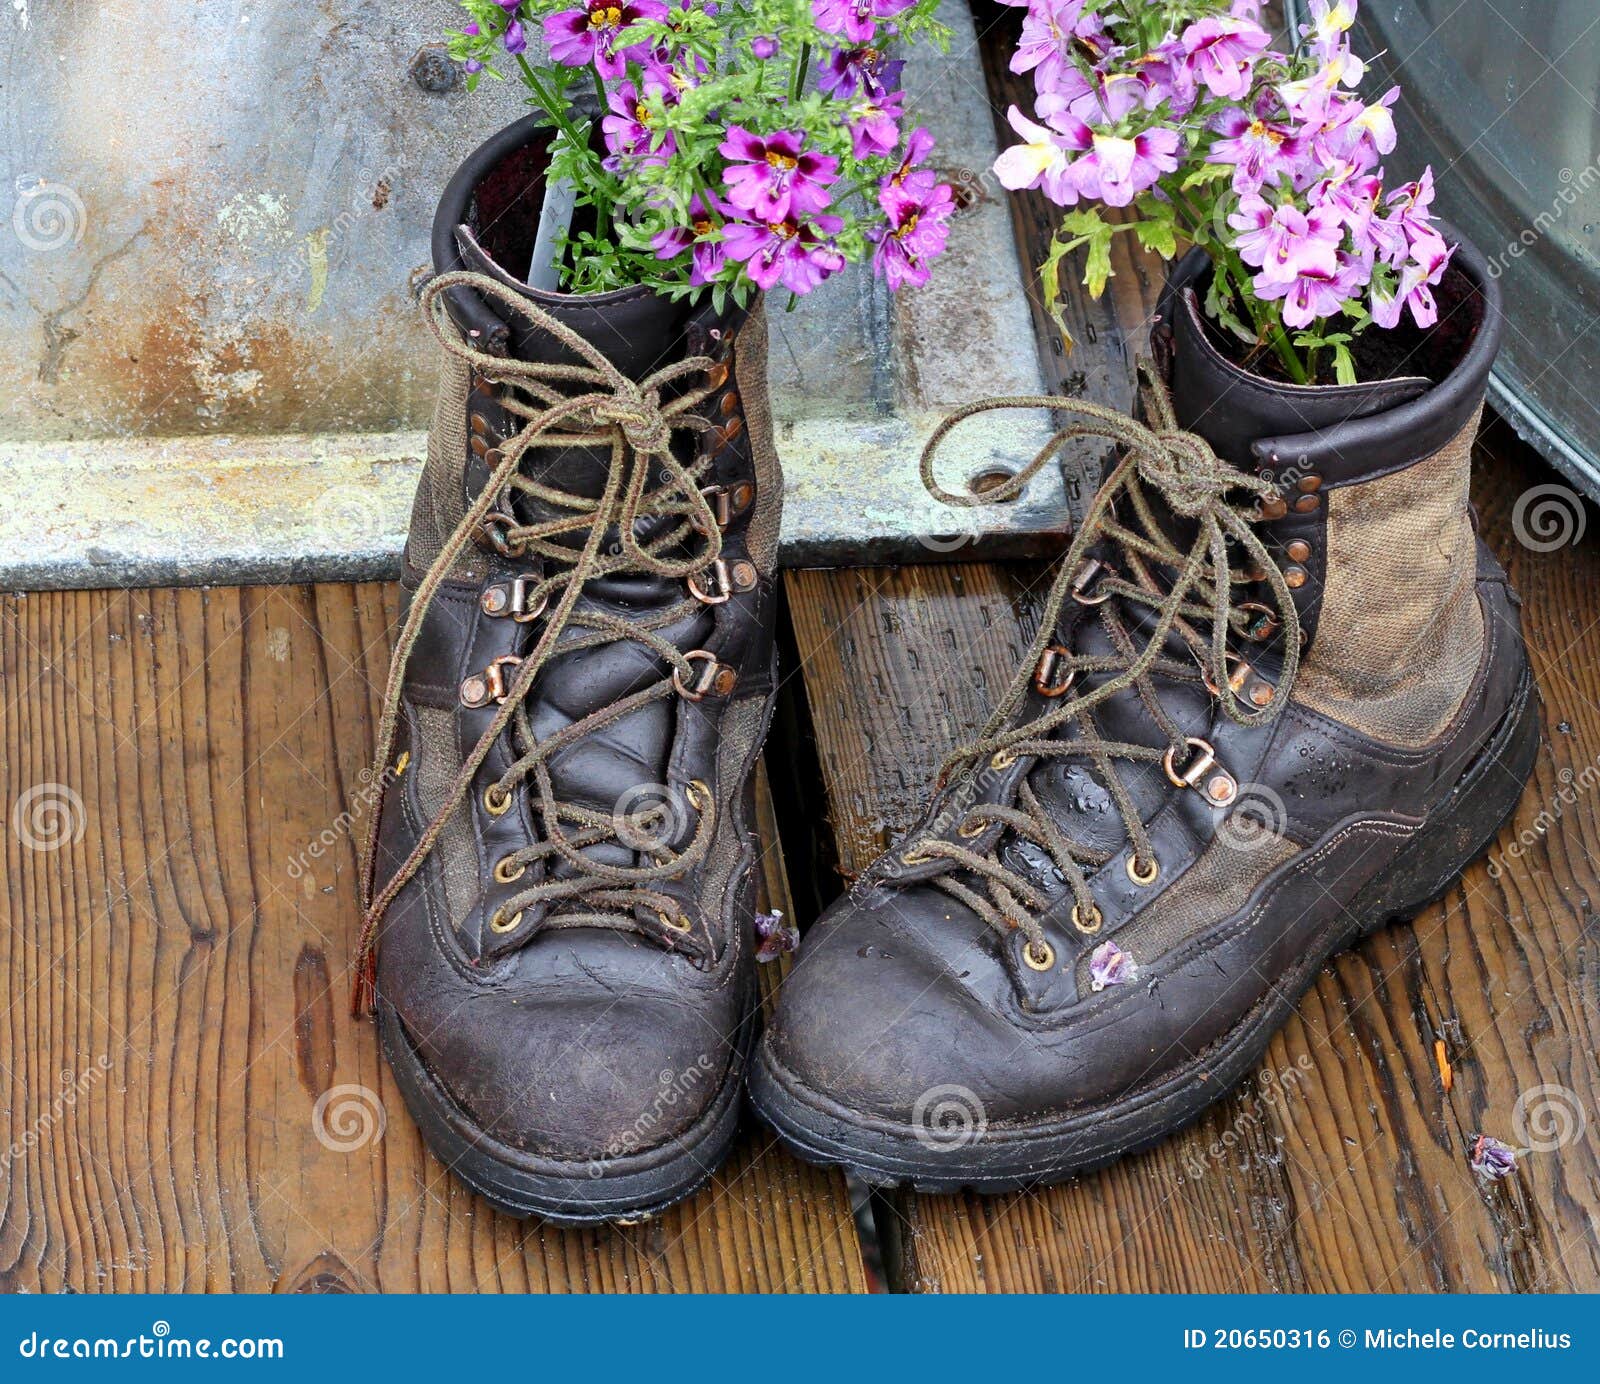 Repurposing old boots. Old worn boots with flowers planted in them on a wooden deck